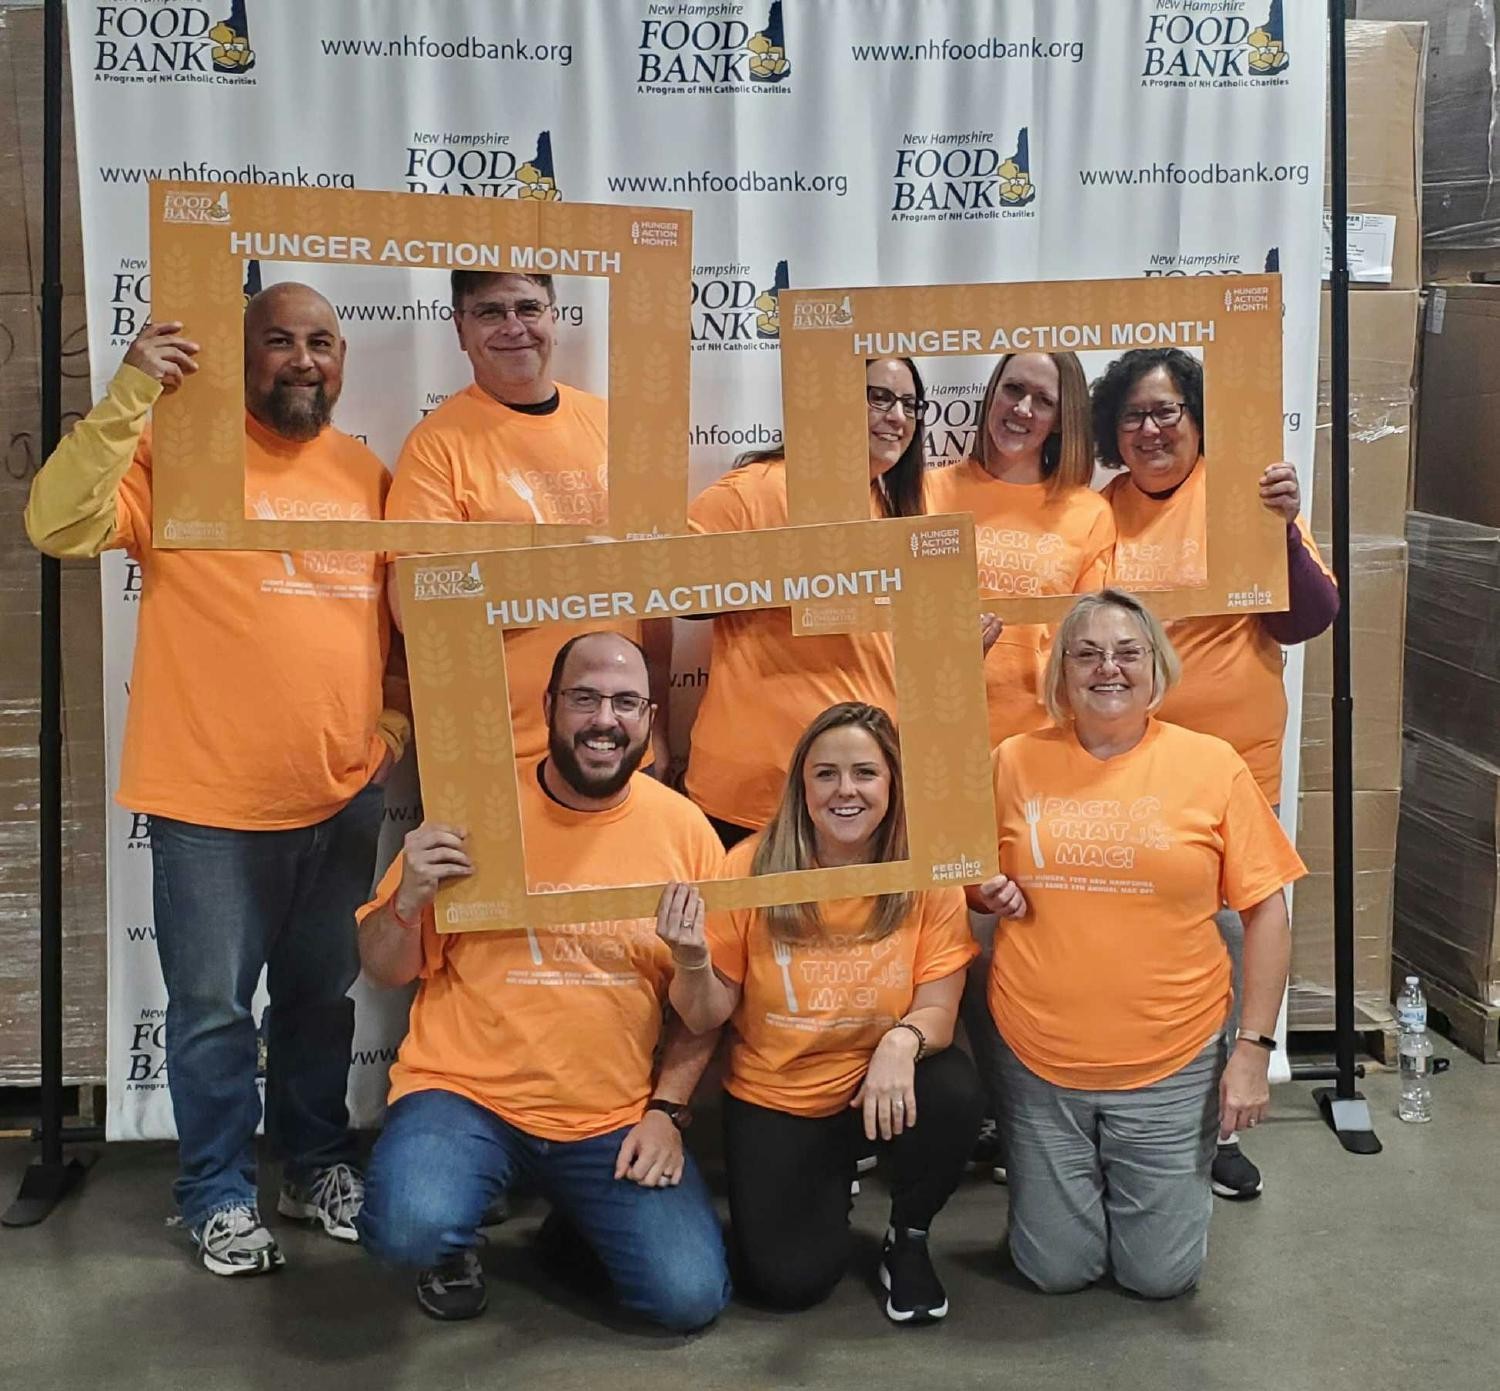 Concord Direct team volunteering for Hunger Action Month.